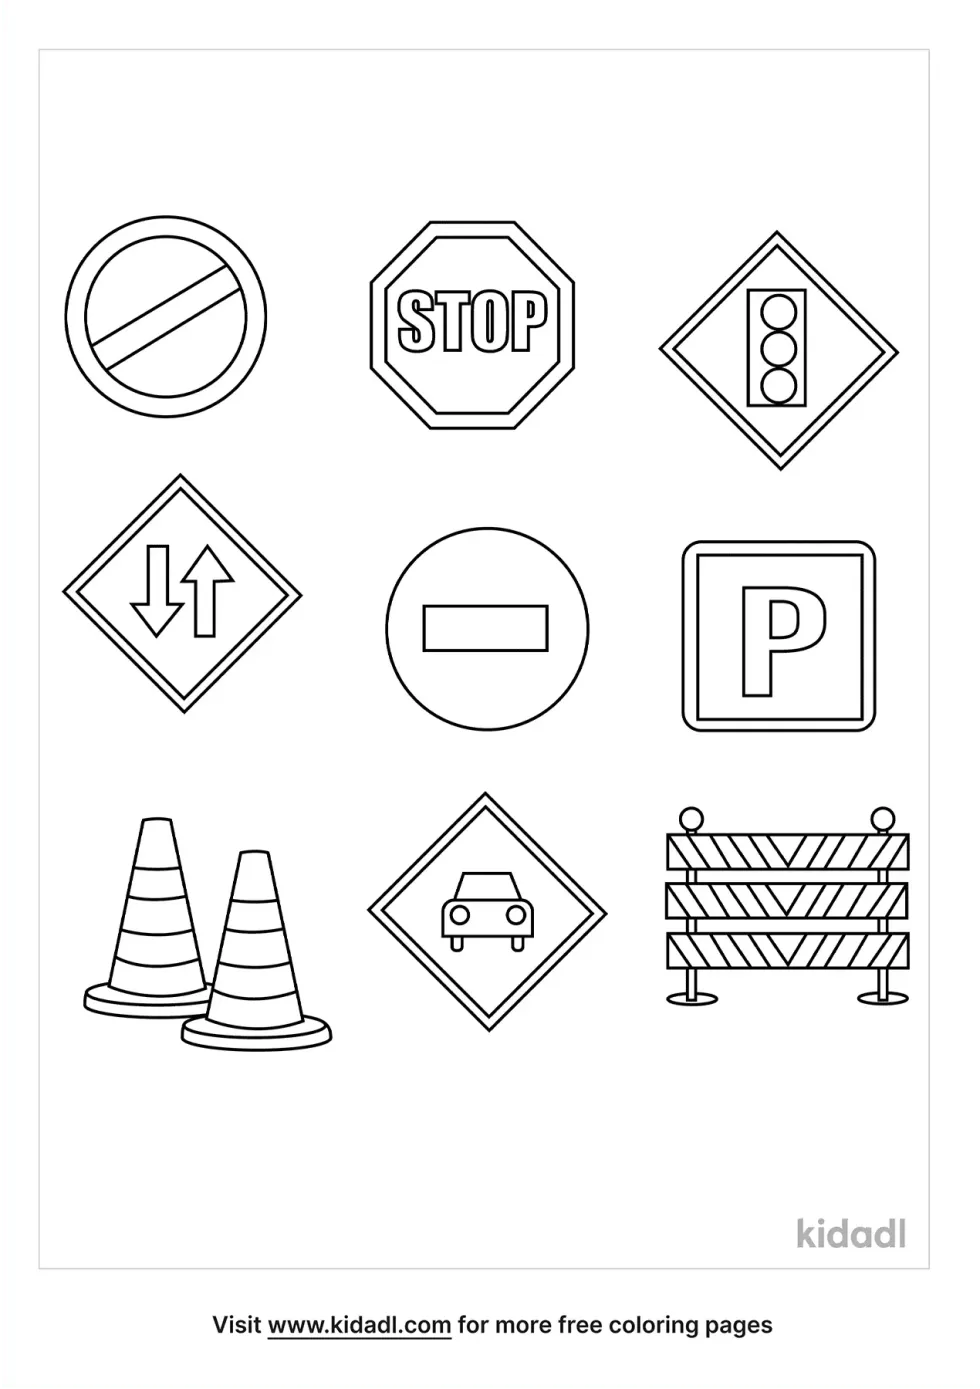 Traffic Signs For Kids Coloring Page